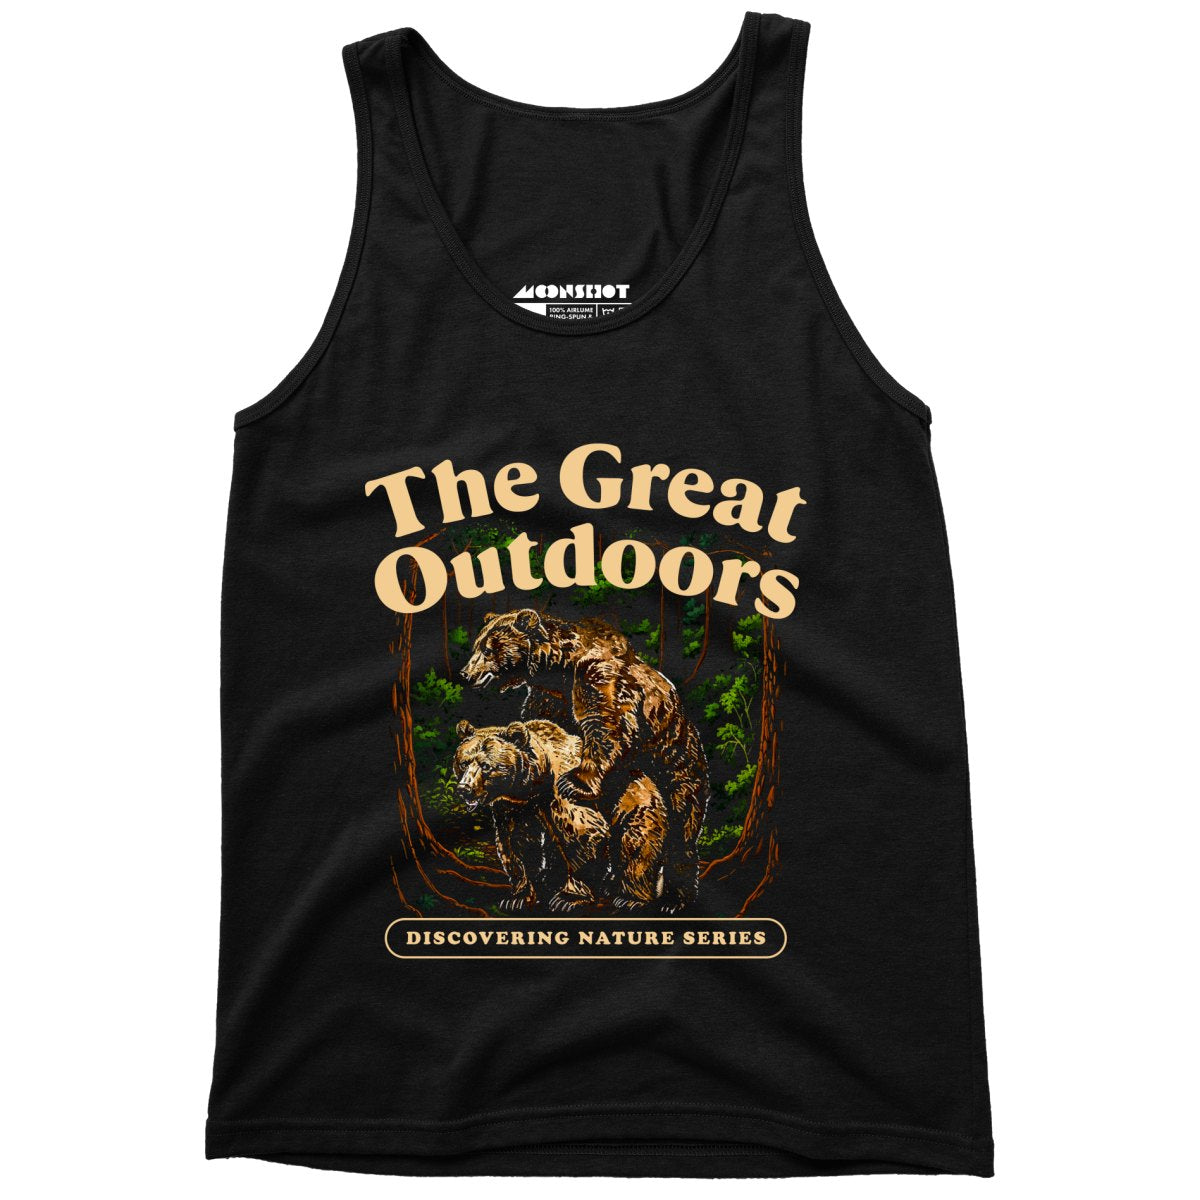 The Great Outdoors - Unisex Tank Top